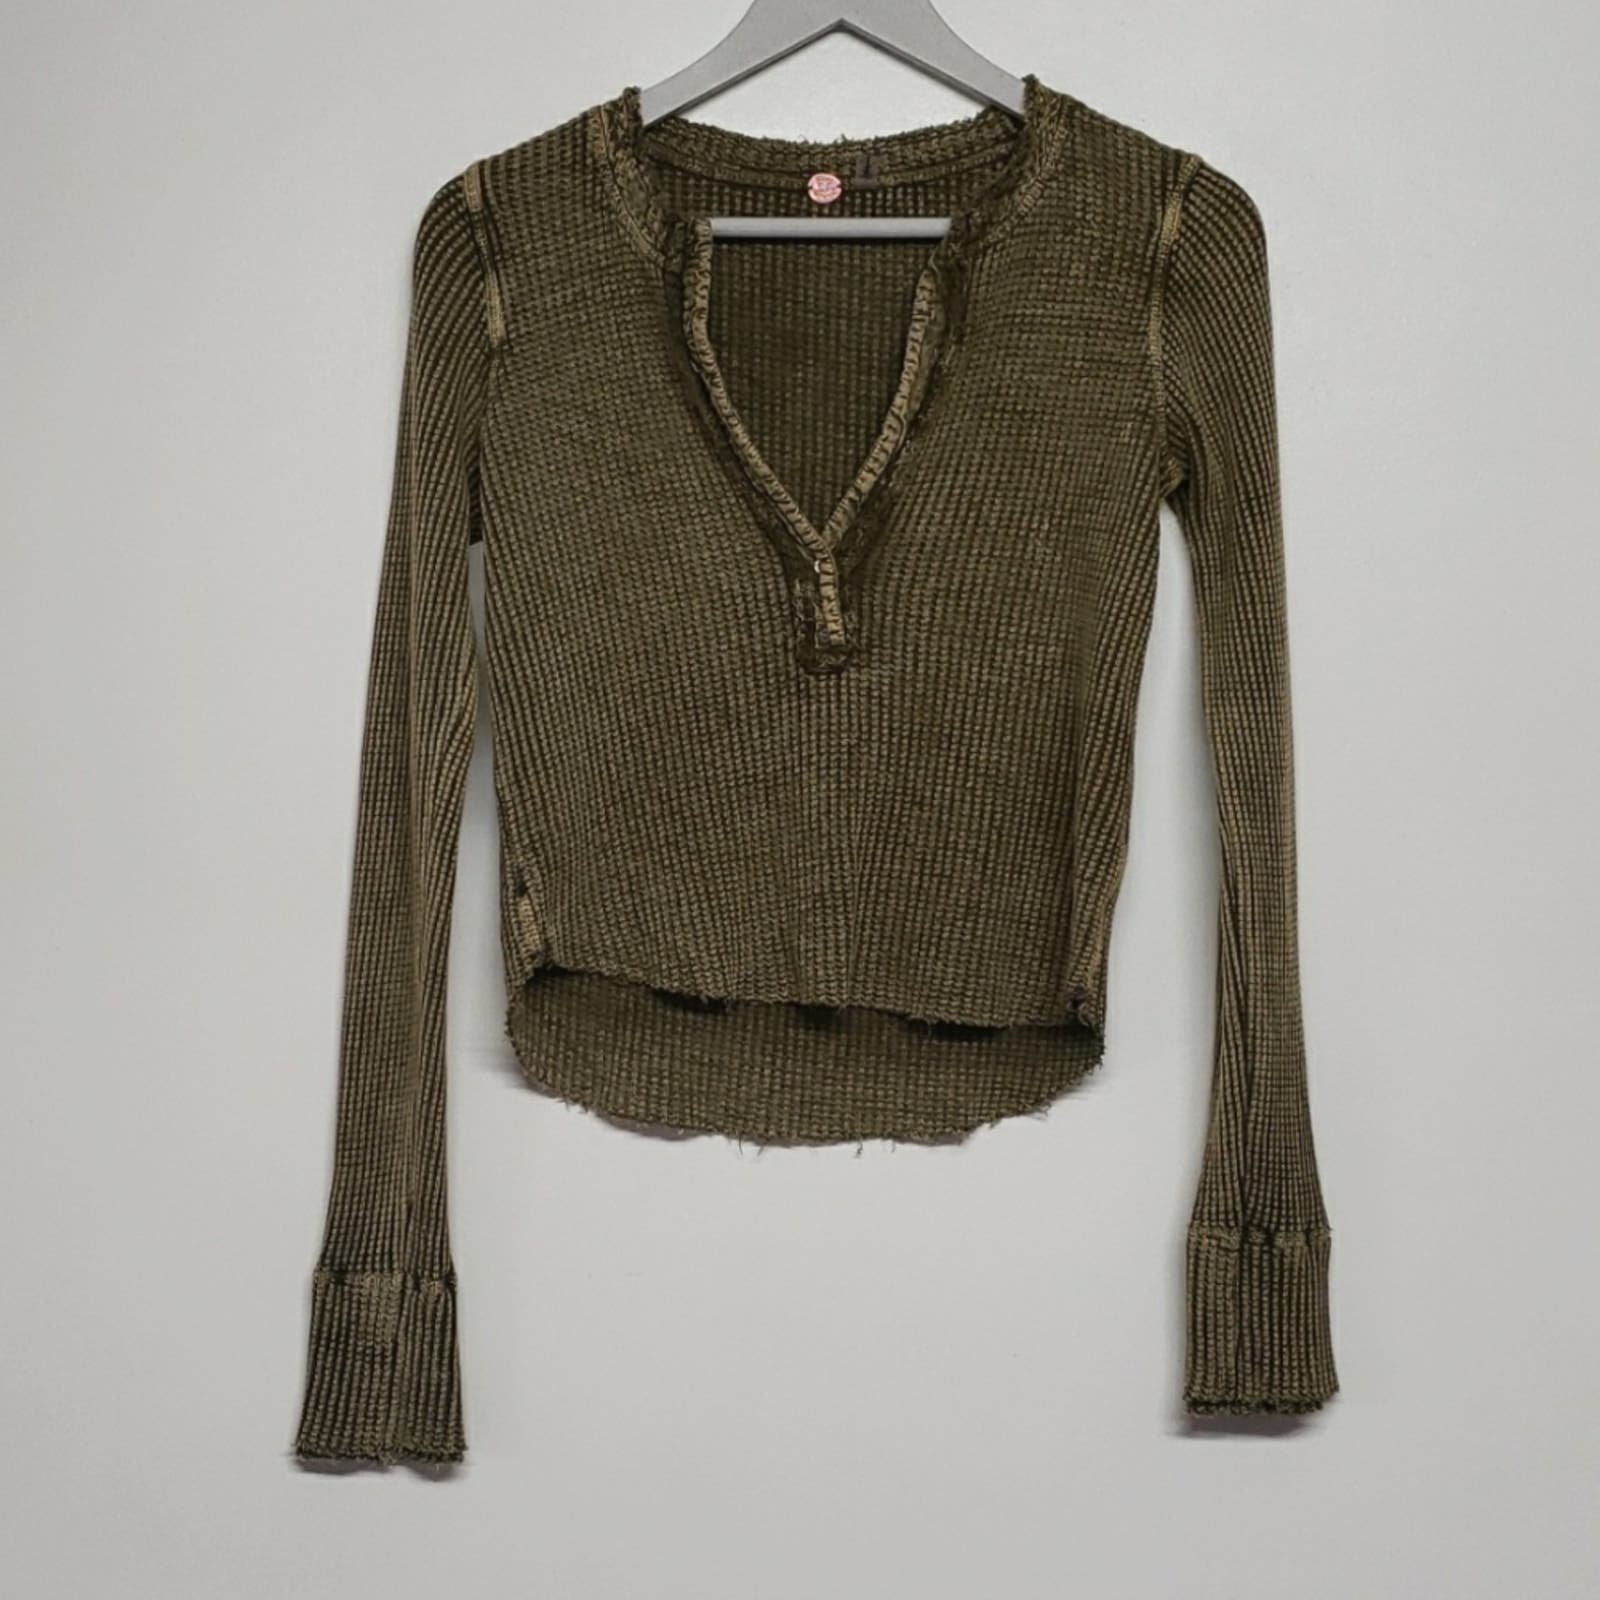 cheapest place to buy  Free People One Colt Thermal Top Women´s Size XS Army Green kFr4OsecY online store